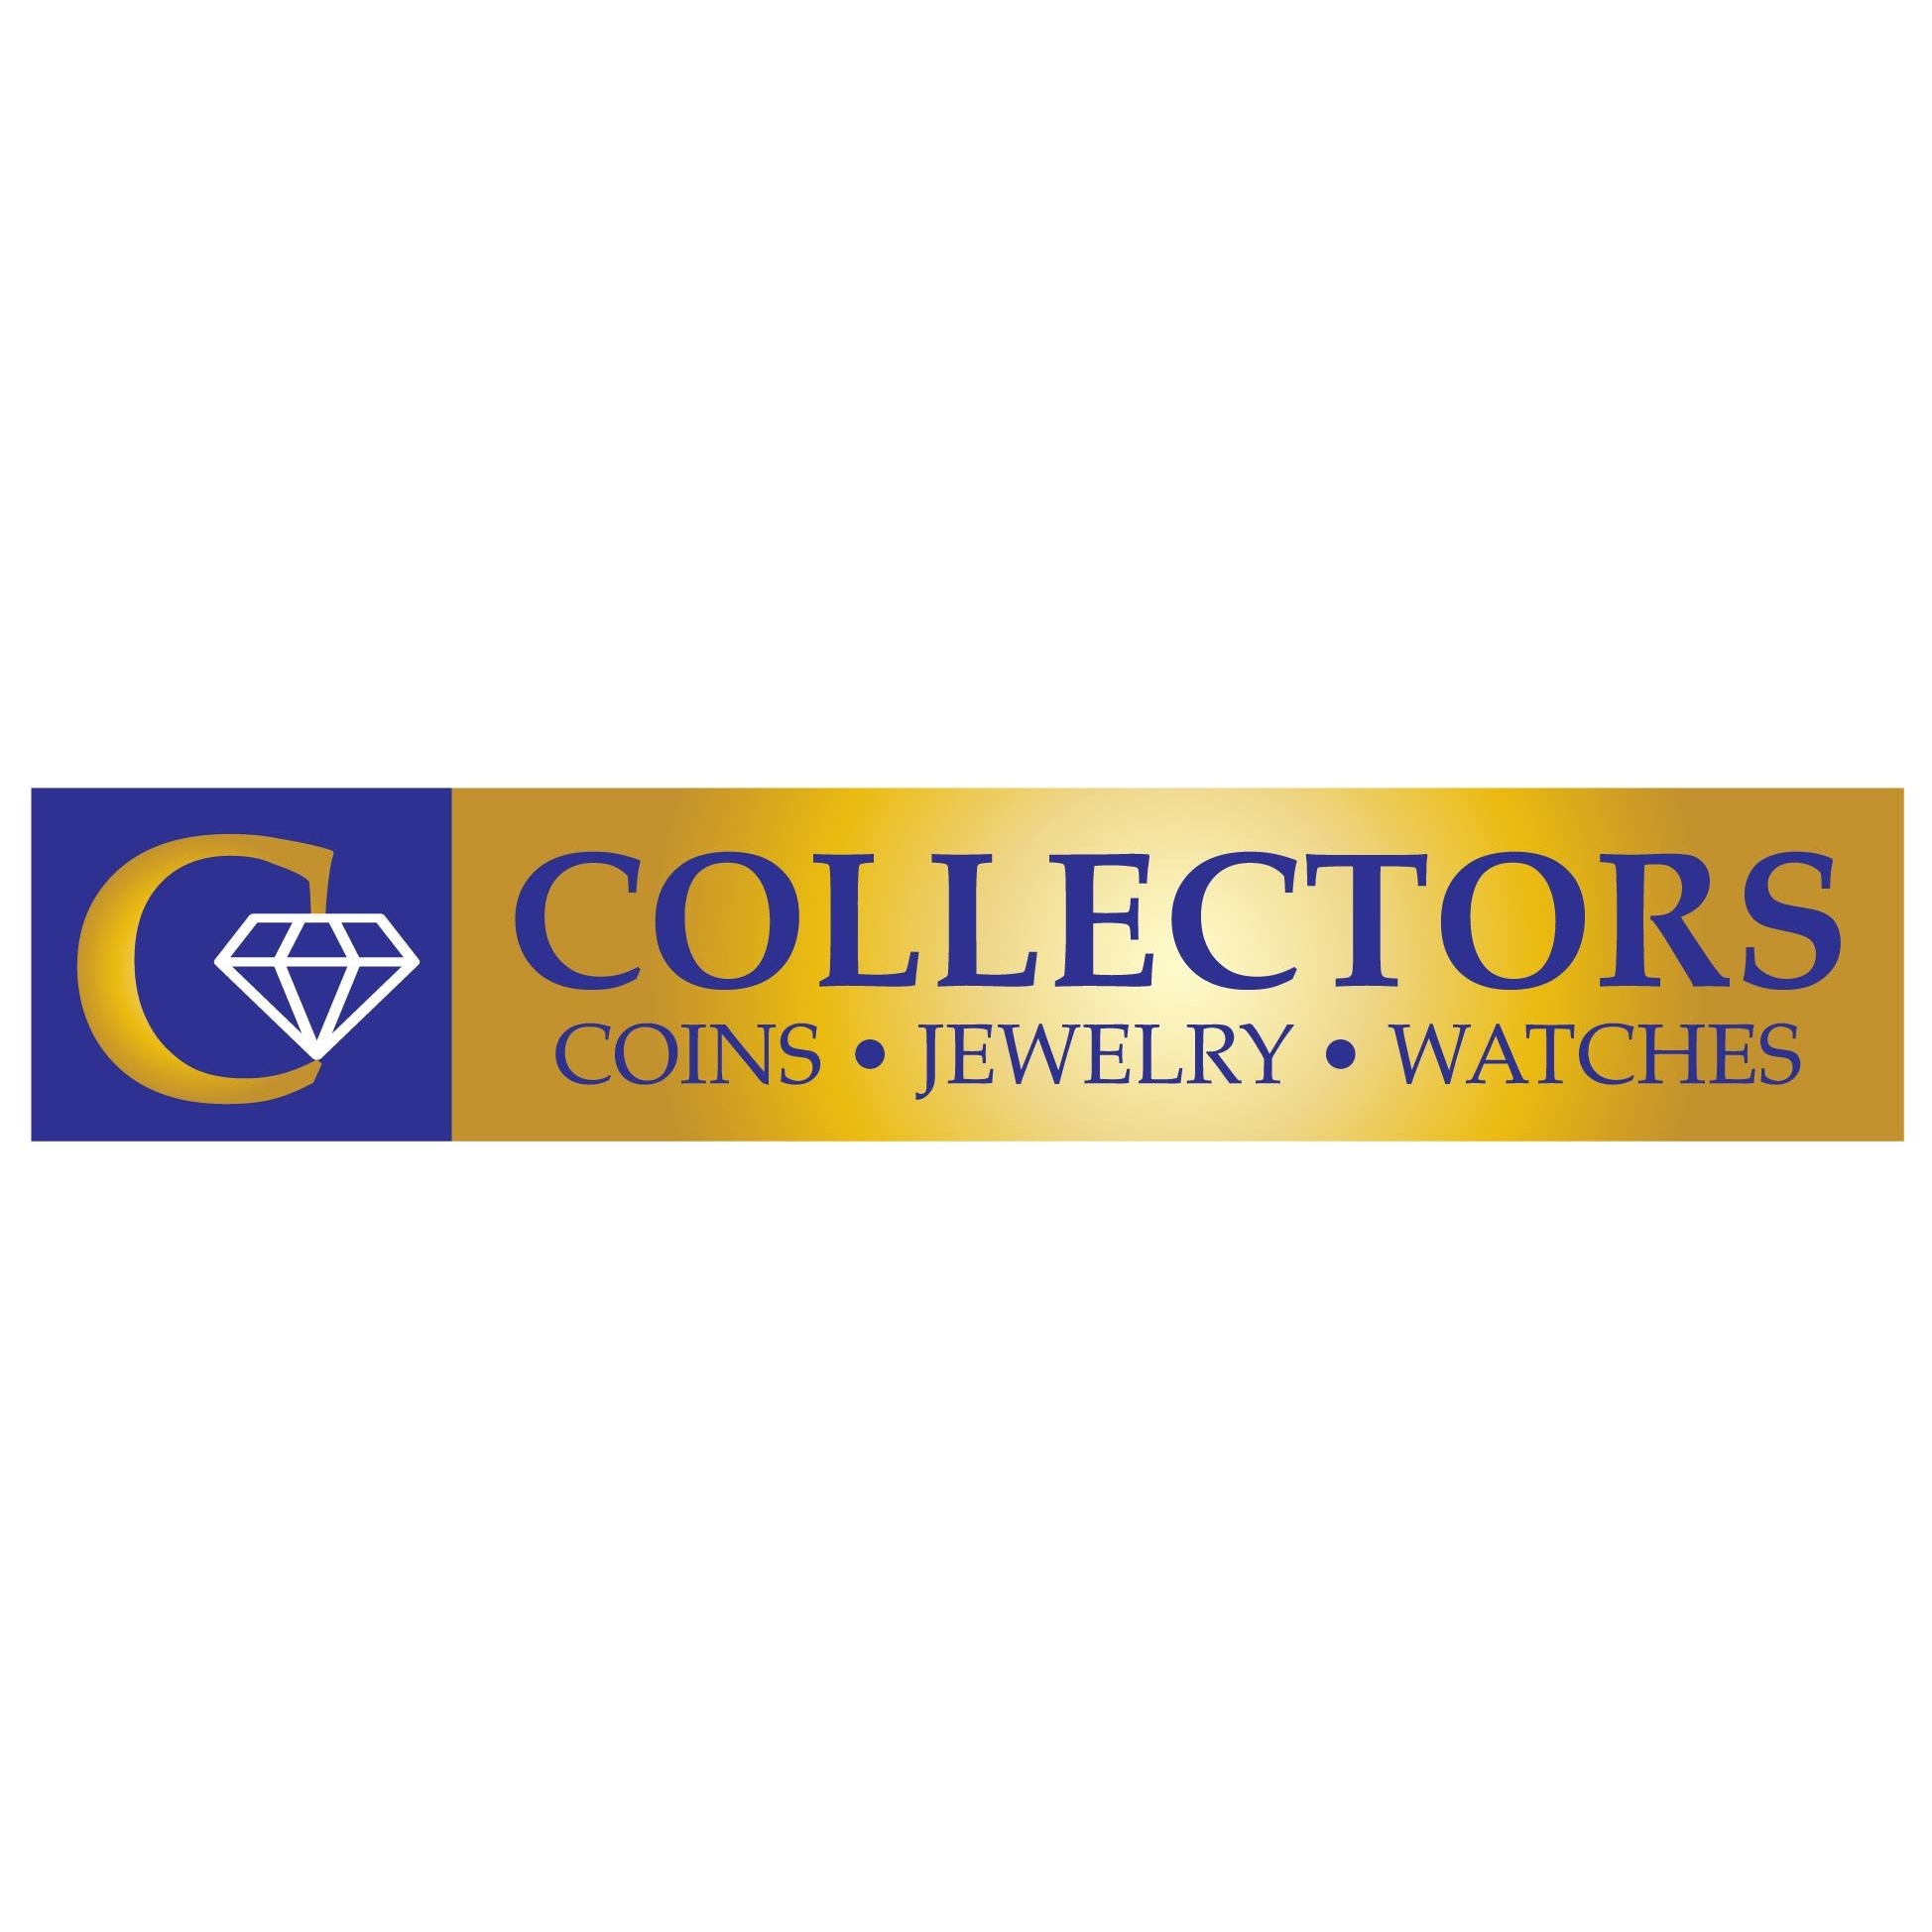 Collectors Coins & Jewelry - Lynbrook, NY 11563 - (516)341-7355 | ShowMeLocal.com